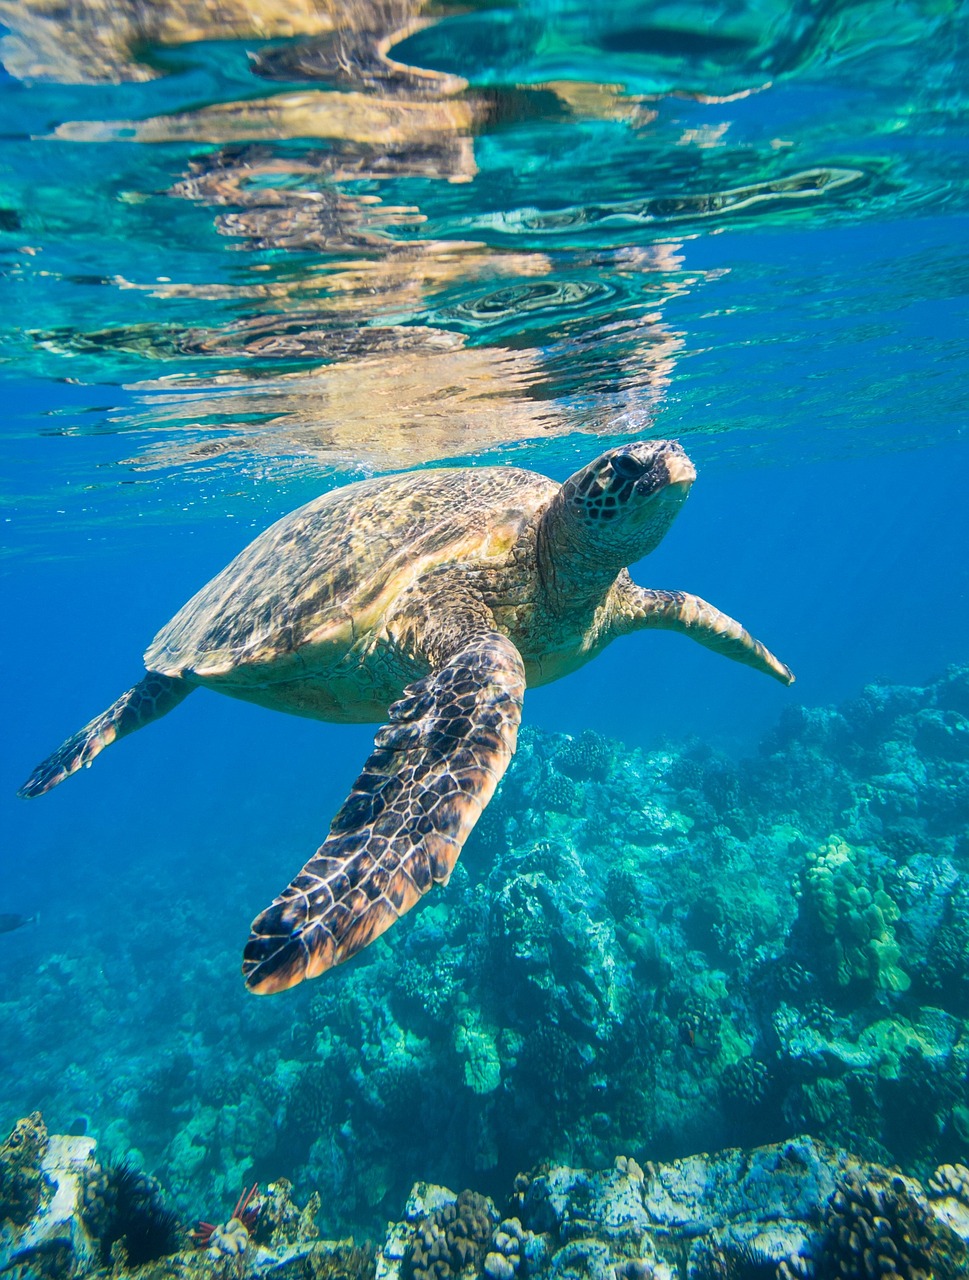 A sea turtle swimming in the ocean.